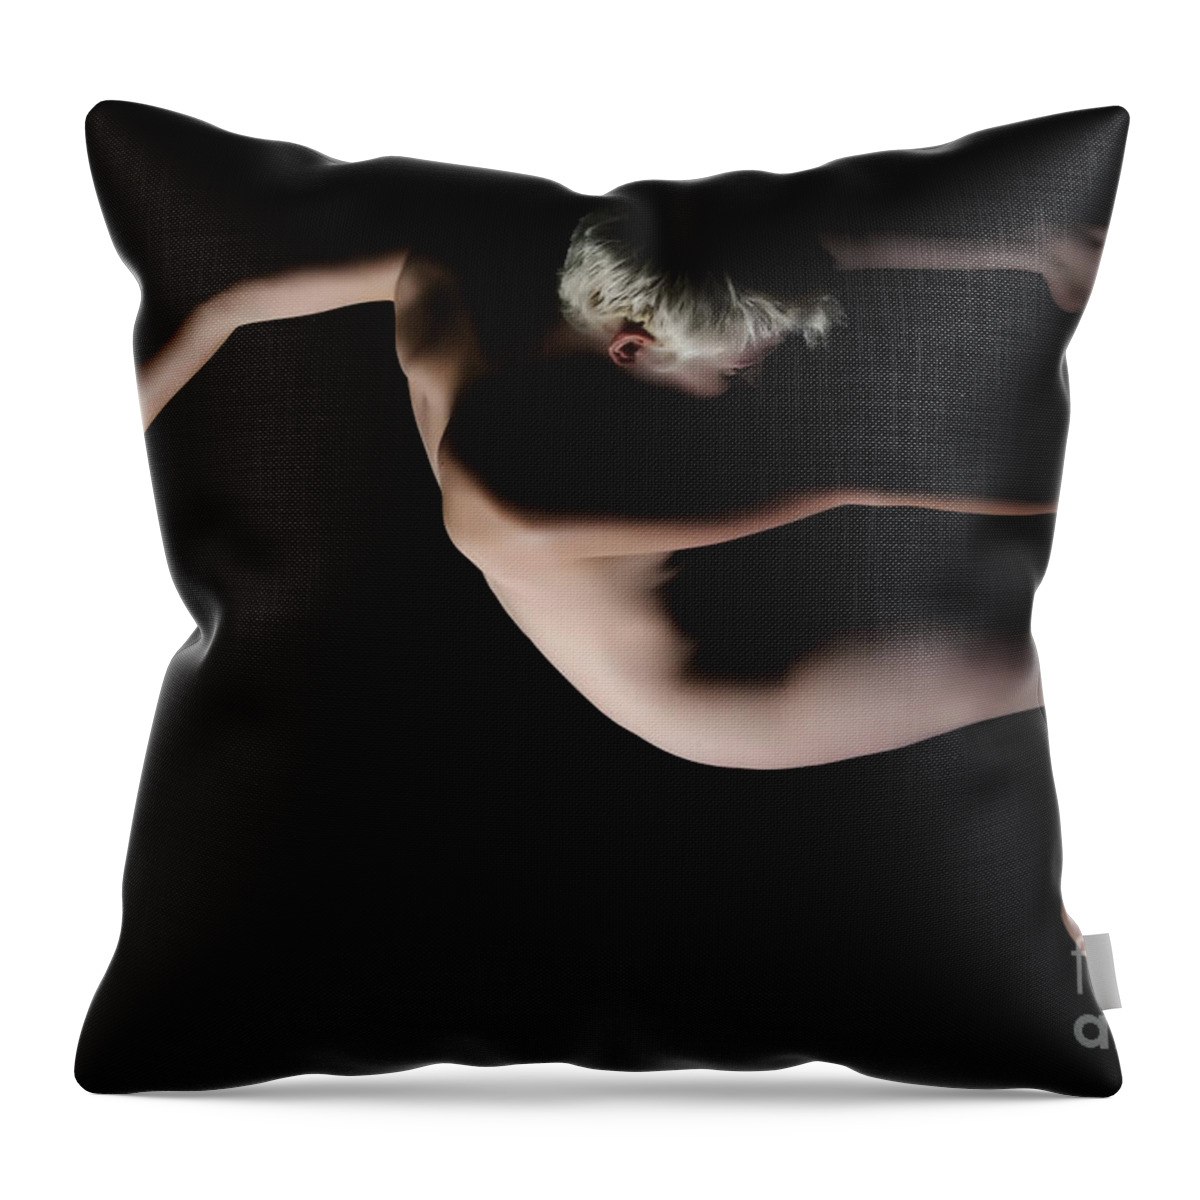 Artistic Photographs Throw Pillow featuring the photograph Go with the flow by Robert WK Clark